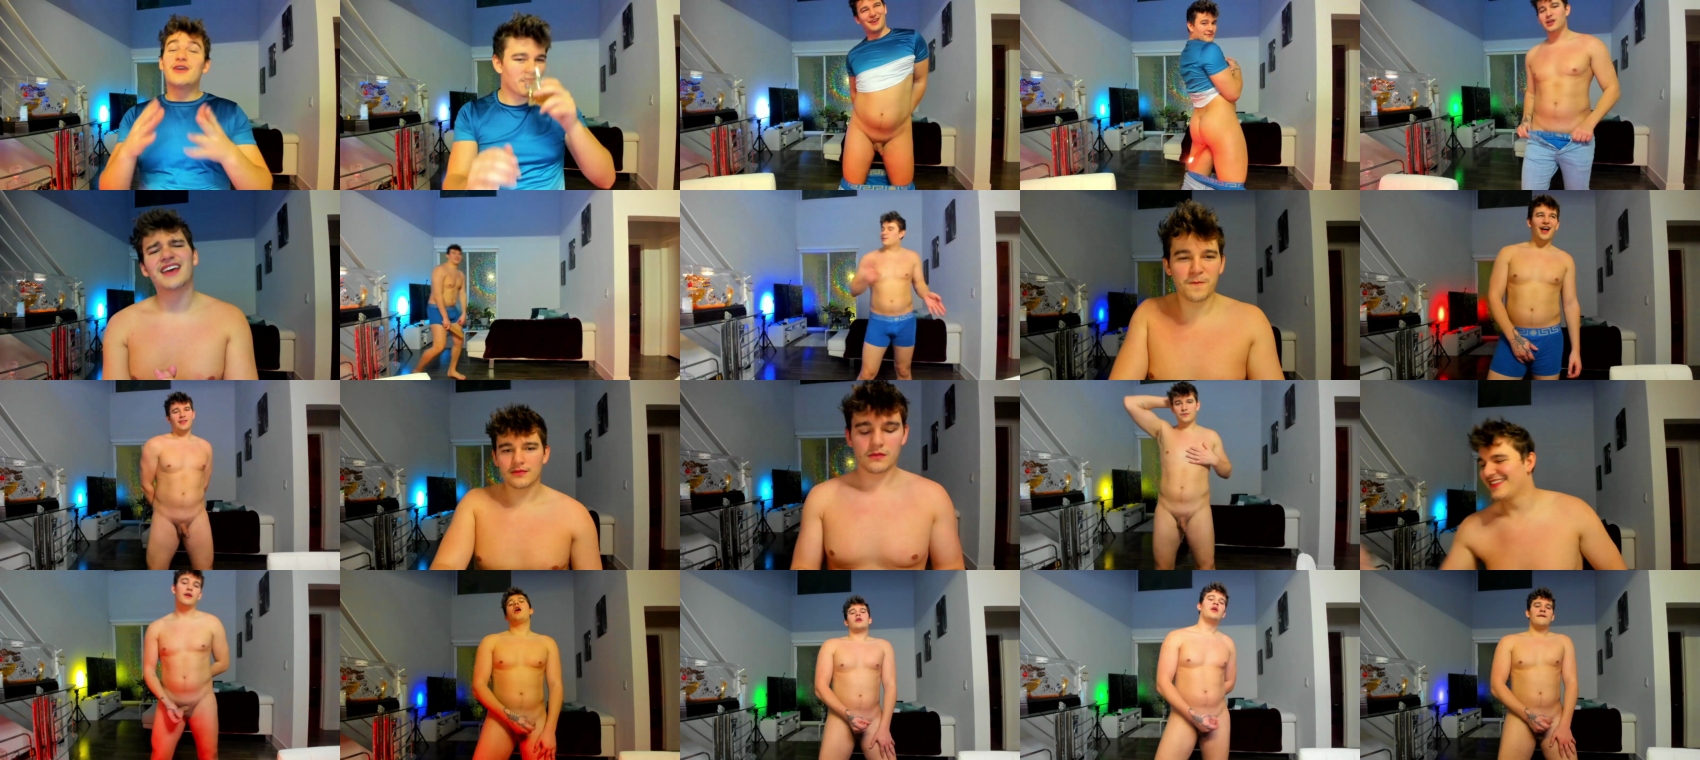 thejohnnystone  31-12-2021 Males sexy